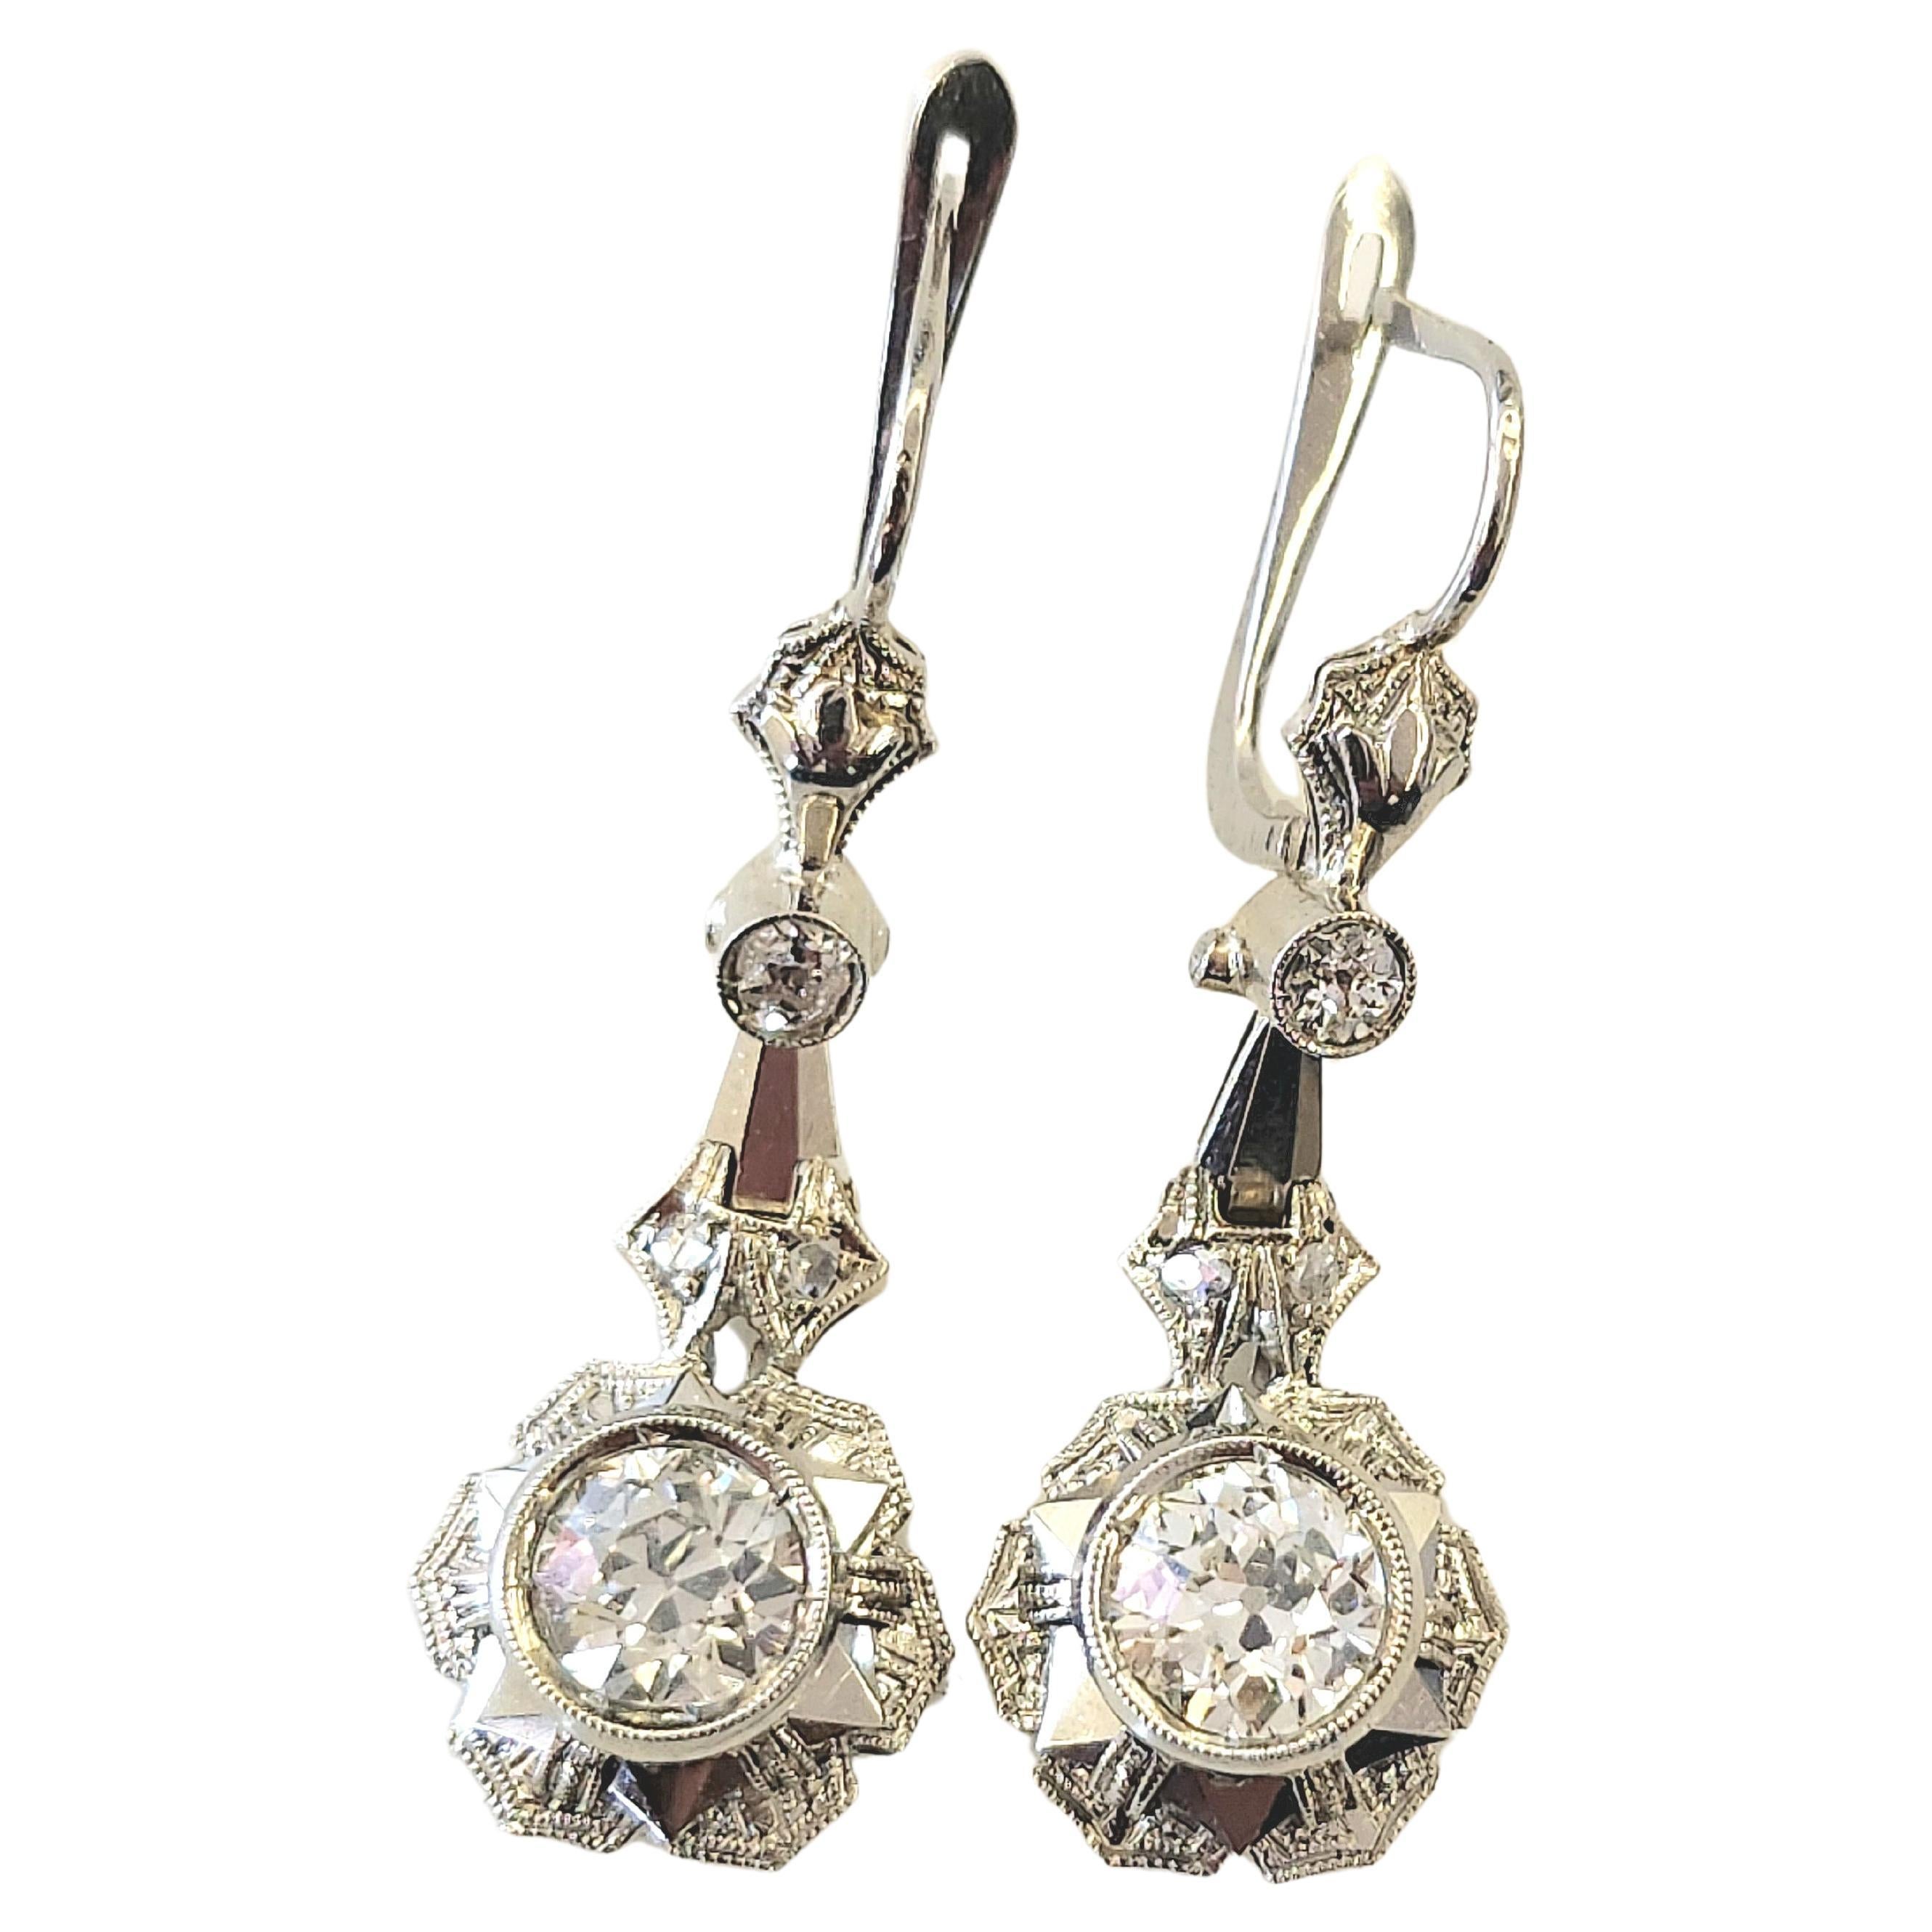 Art Deco era 1920s earrings made of 18k white gold centered with 2 old cut diamonds with a total weight of 1.50 carats 0.75ct each diamond weight H color white vvs clearity topped with 2 smaller diamonds in detailed art deco designe workmanship